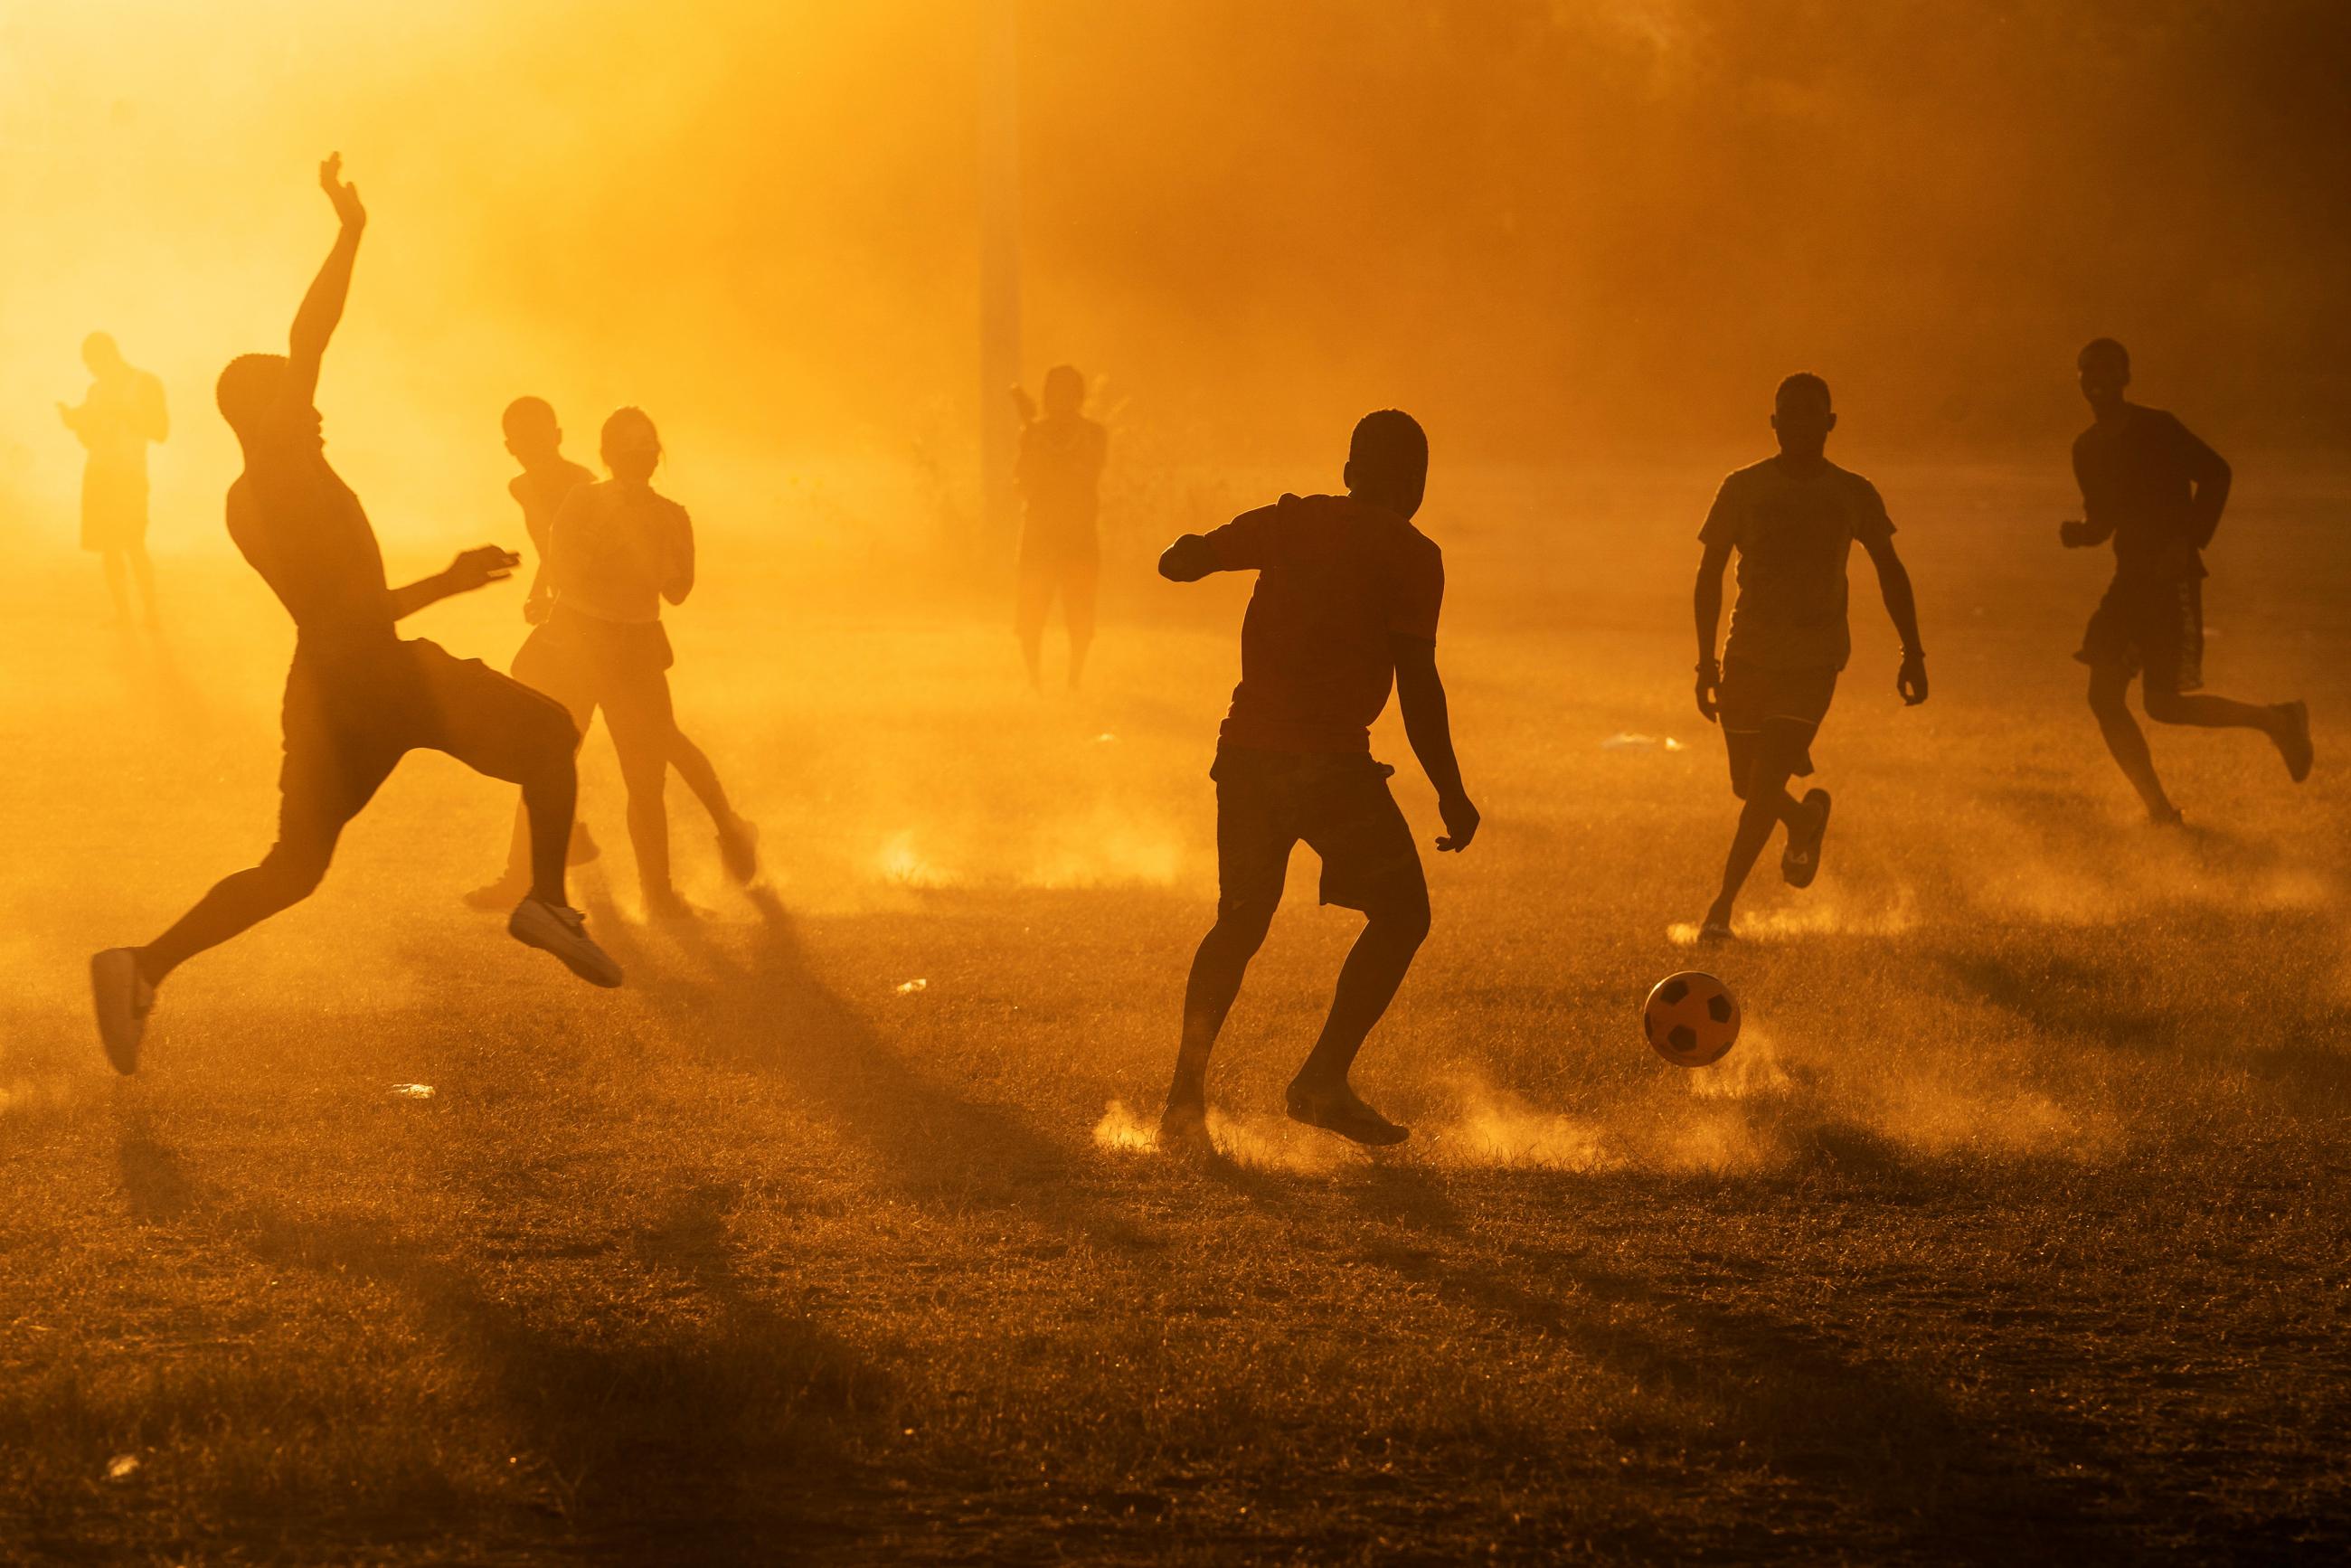 Migrants seeking asylum in the U.S., who returned to the Mexican side of the border to avoid deportation, play soccer in a makeshift migrant camp in Braulio Fernandez Ecological Park in Ciudad Acuna, Mexico, September 22, 2021.